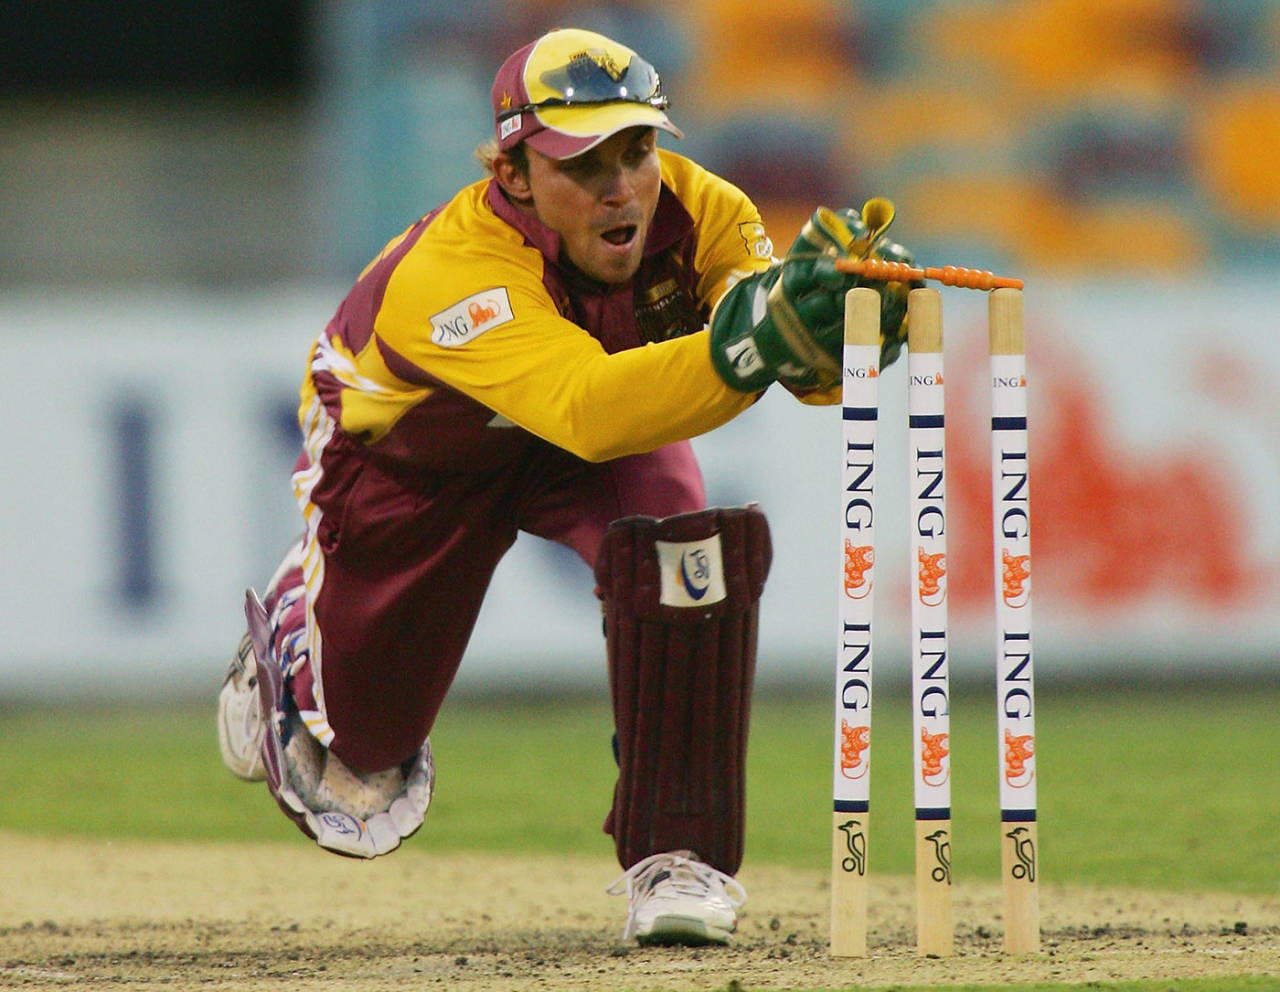 Chris Hartley attempts a run out, Queensland v Victoria, ING Cup, Brisbane, January 25, 2006